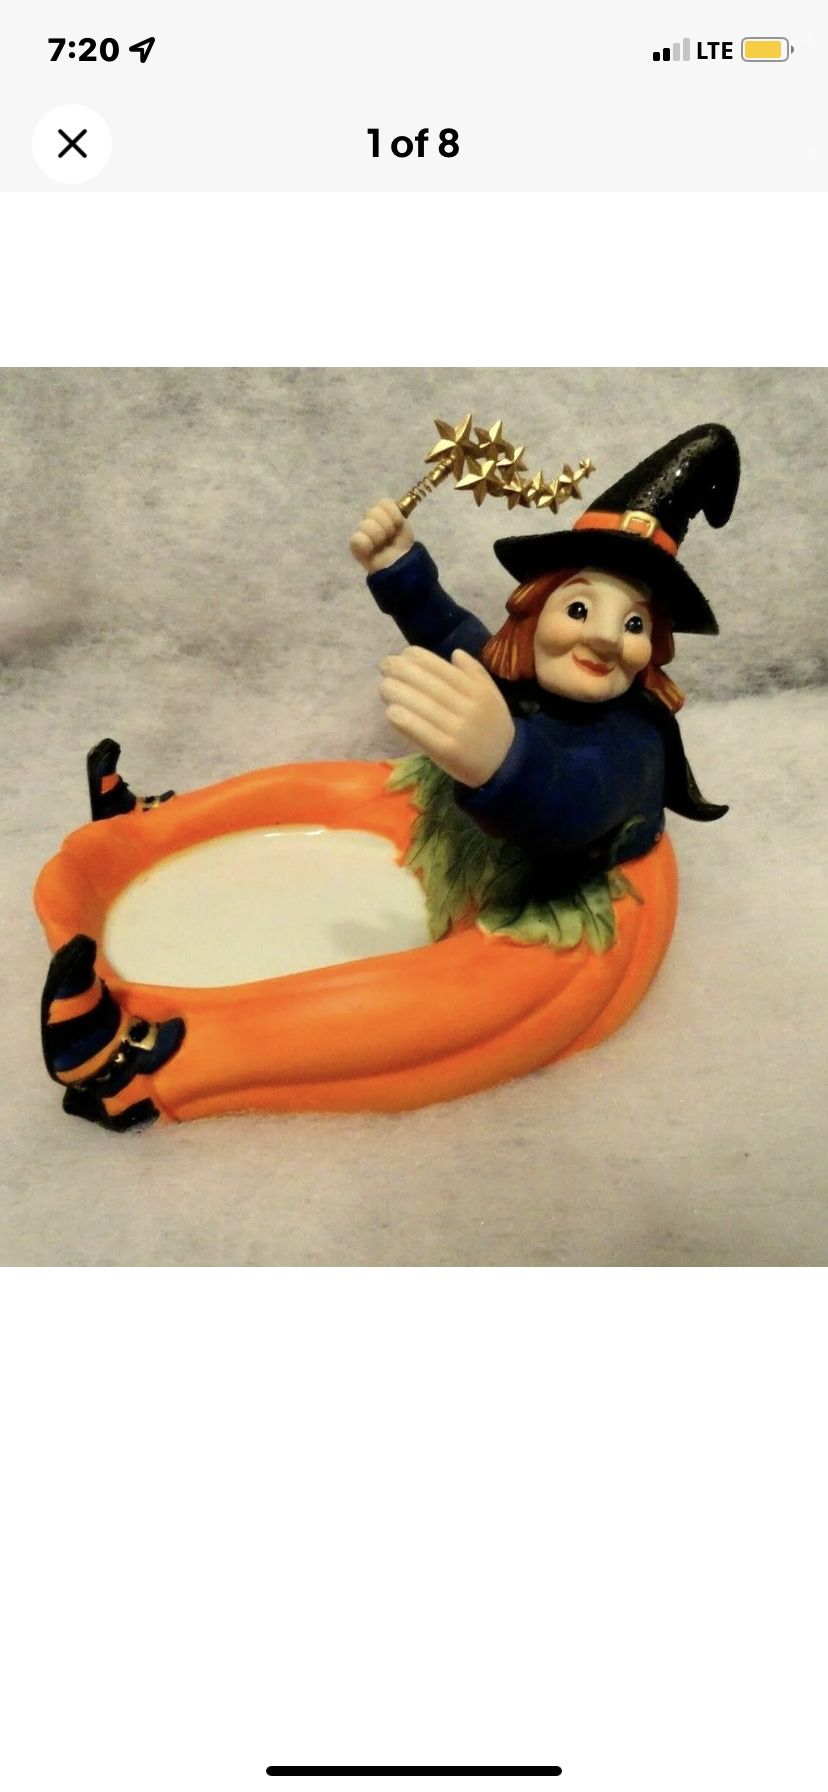 PARTY Lite PUMPKIN WITCH CANDLE HOLDER NEW With Box